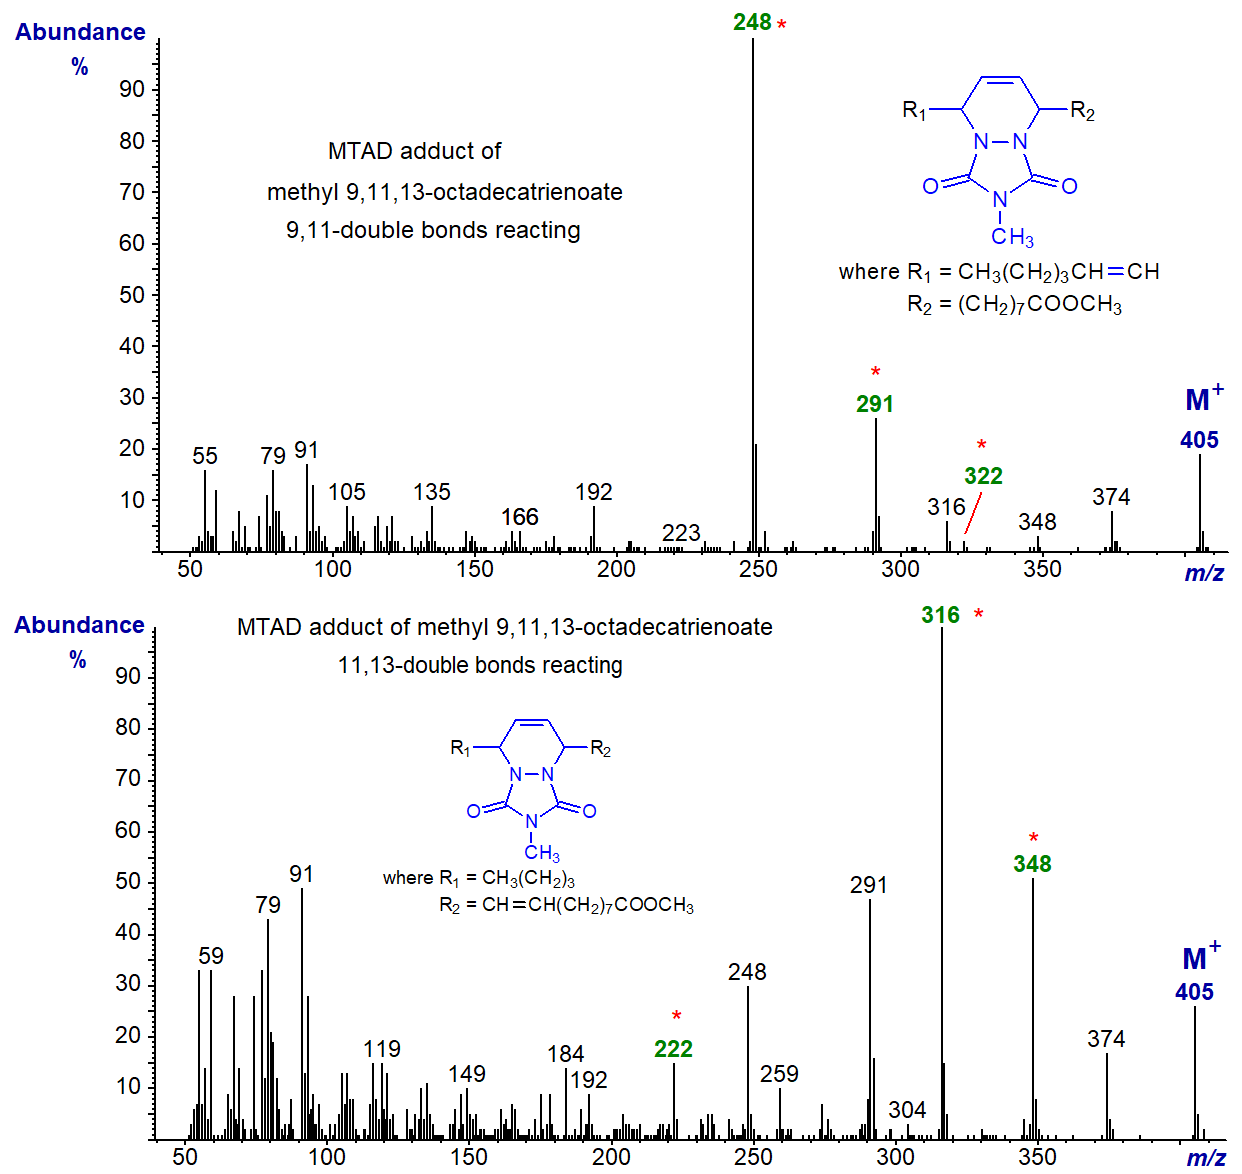 Mass spectra of the two MTAD adducts of methyl punicate